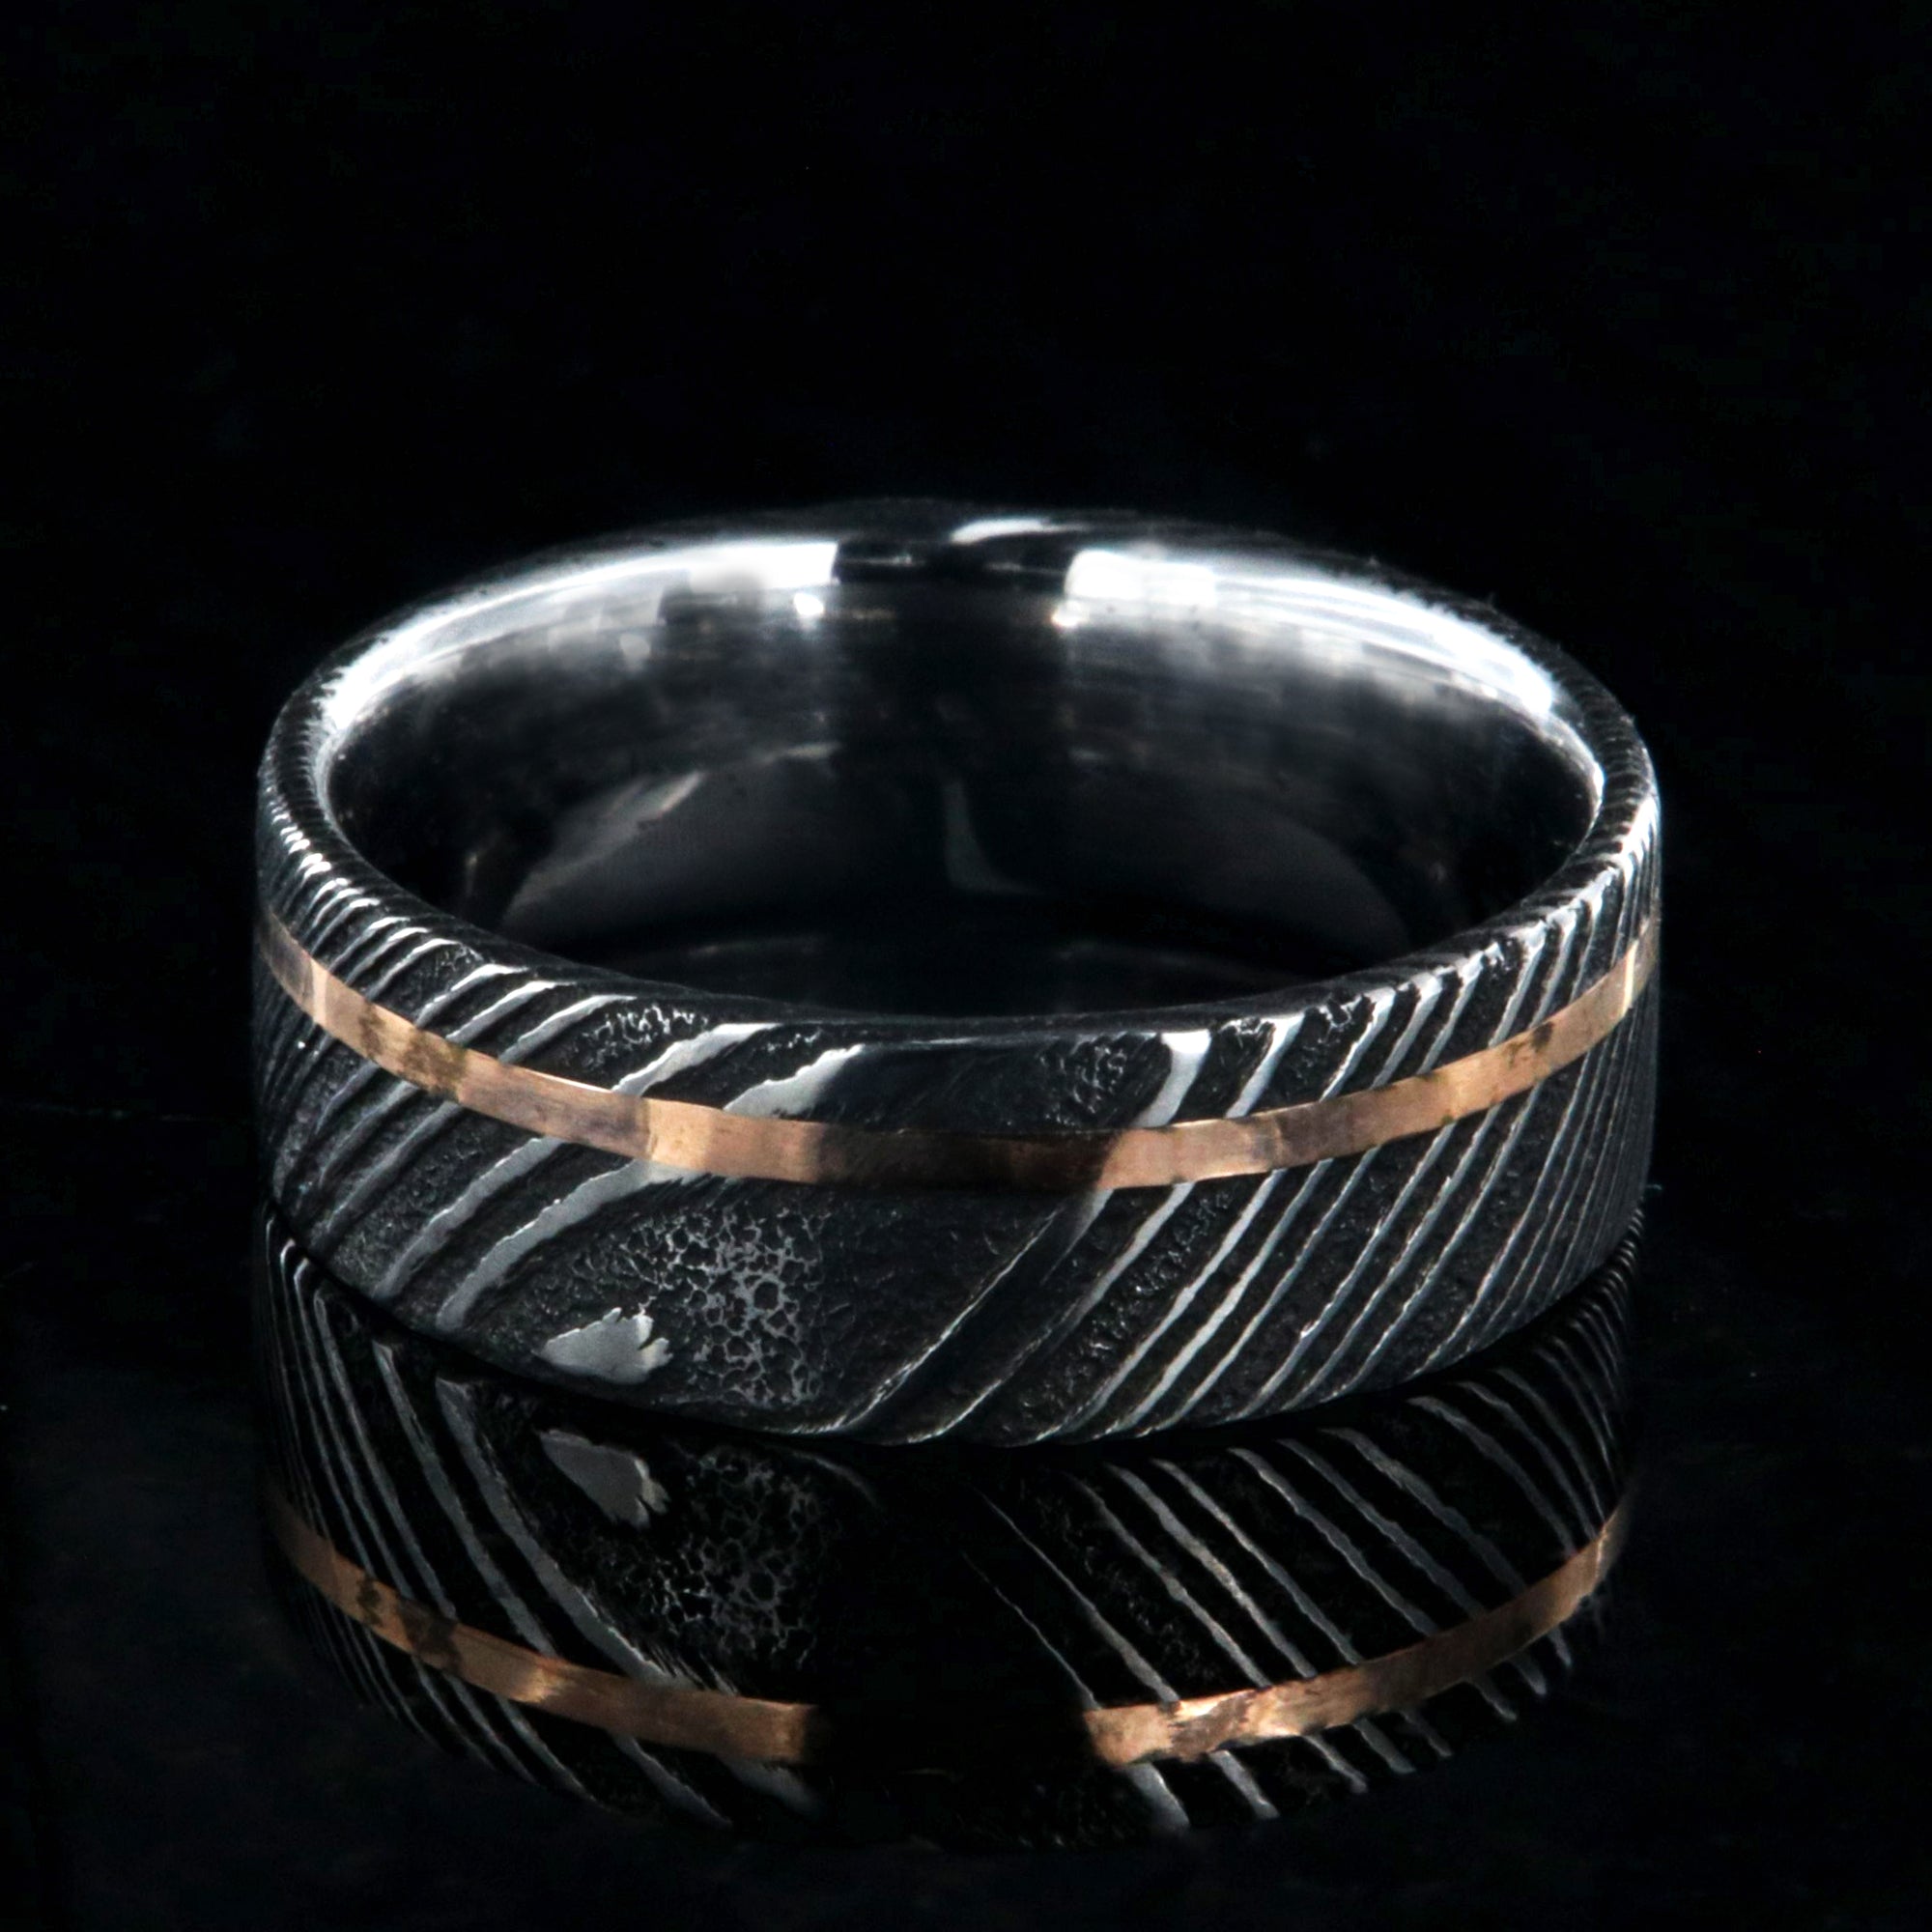 7mm wide black Damascus steel wedding ring with rose gold and flat profile